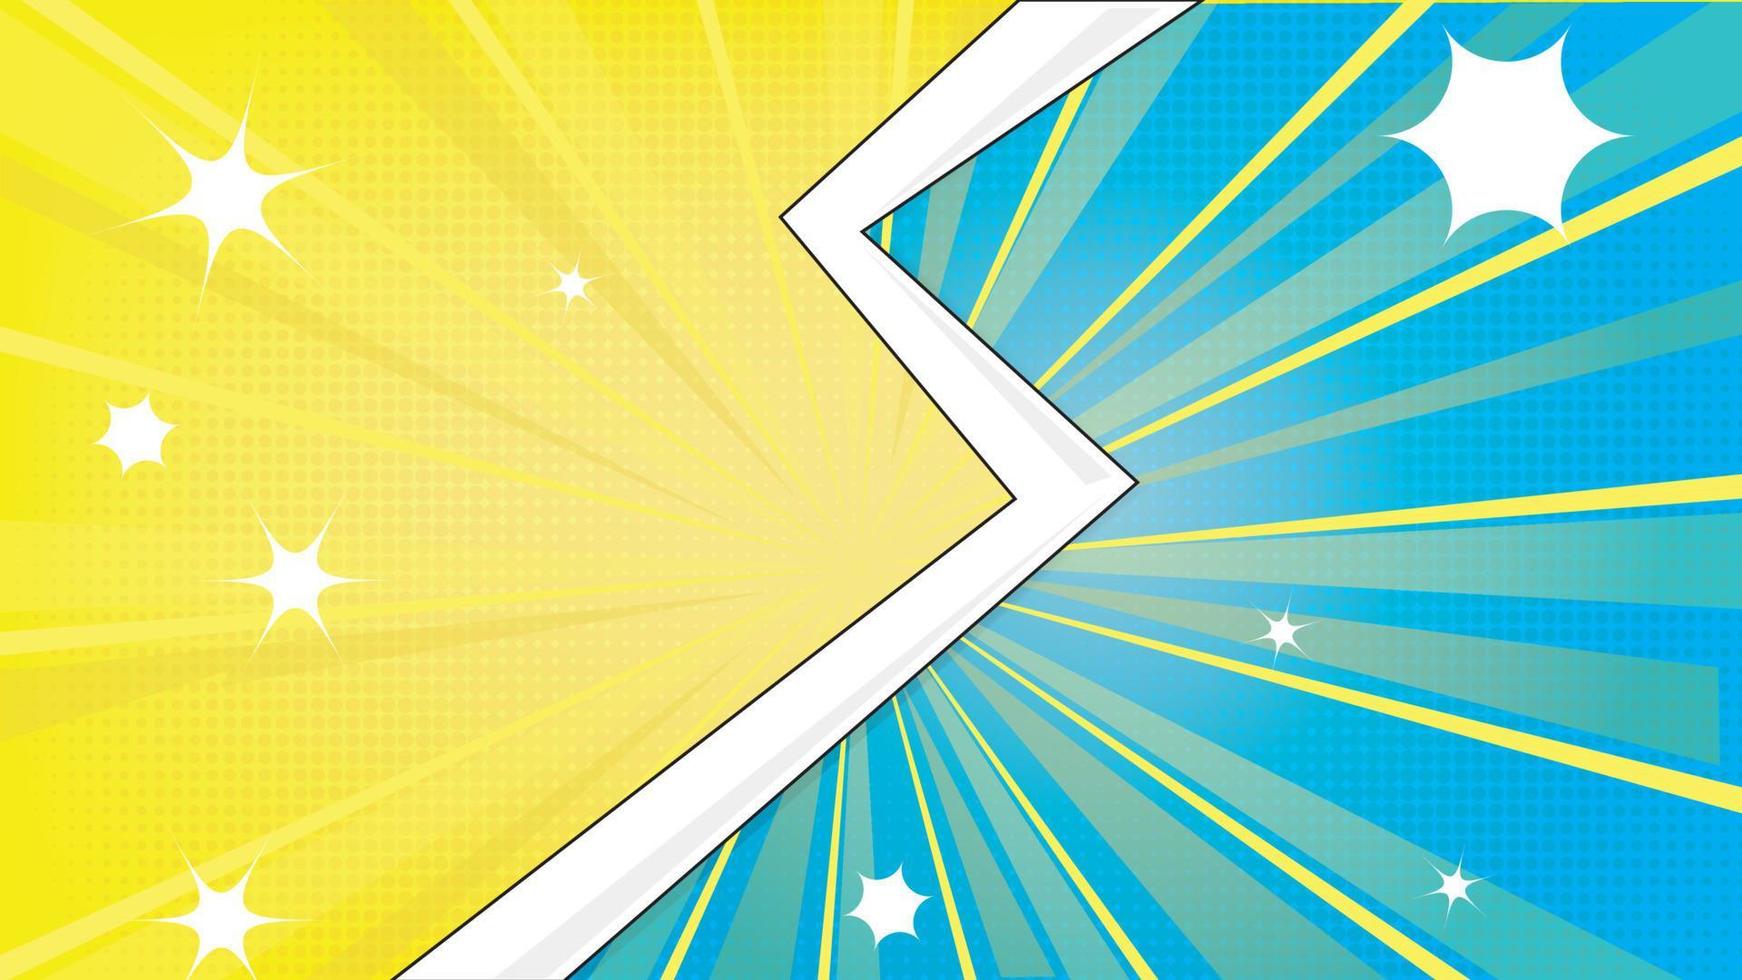 comic background in yellow and blue color vector